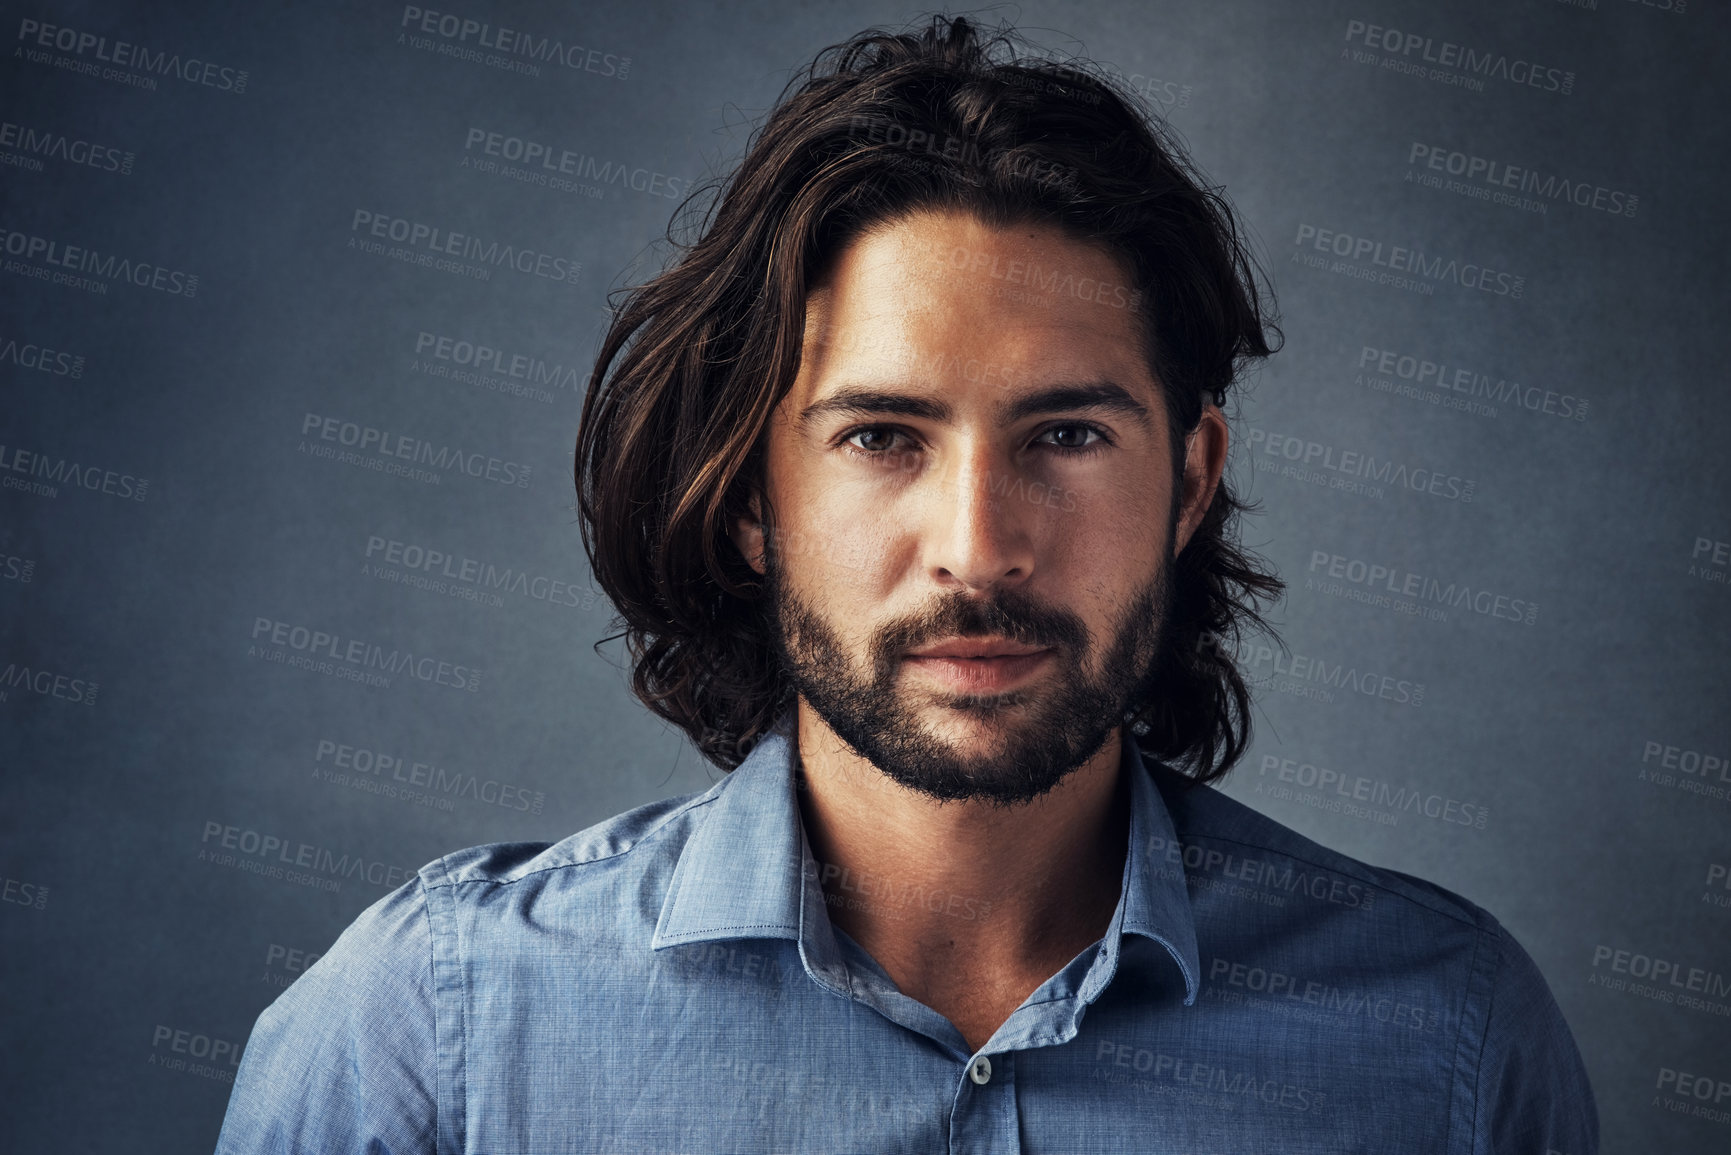 Buy stock photo Beard, long hair and portrait of business man with confidence on gray studio background. Face, businessman and model with professional style of entrepreneur, manager or formal corporate worker